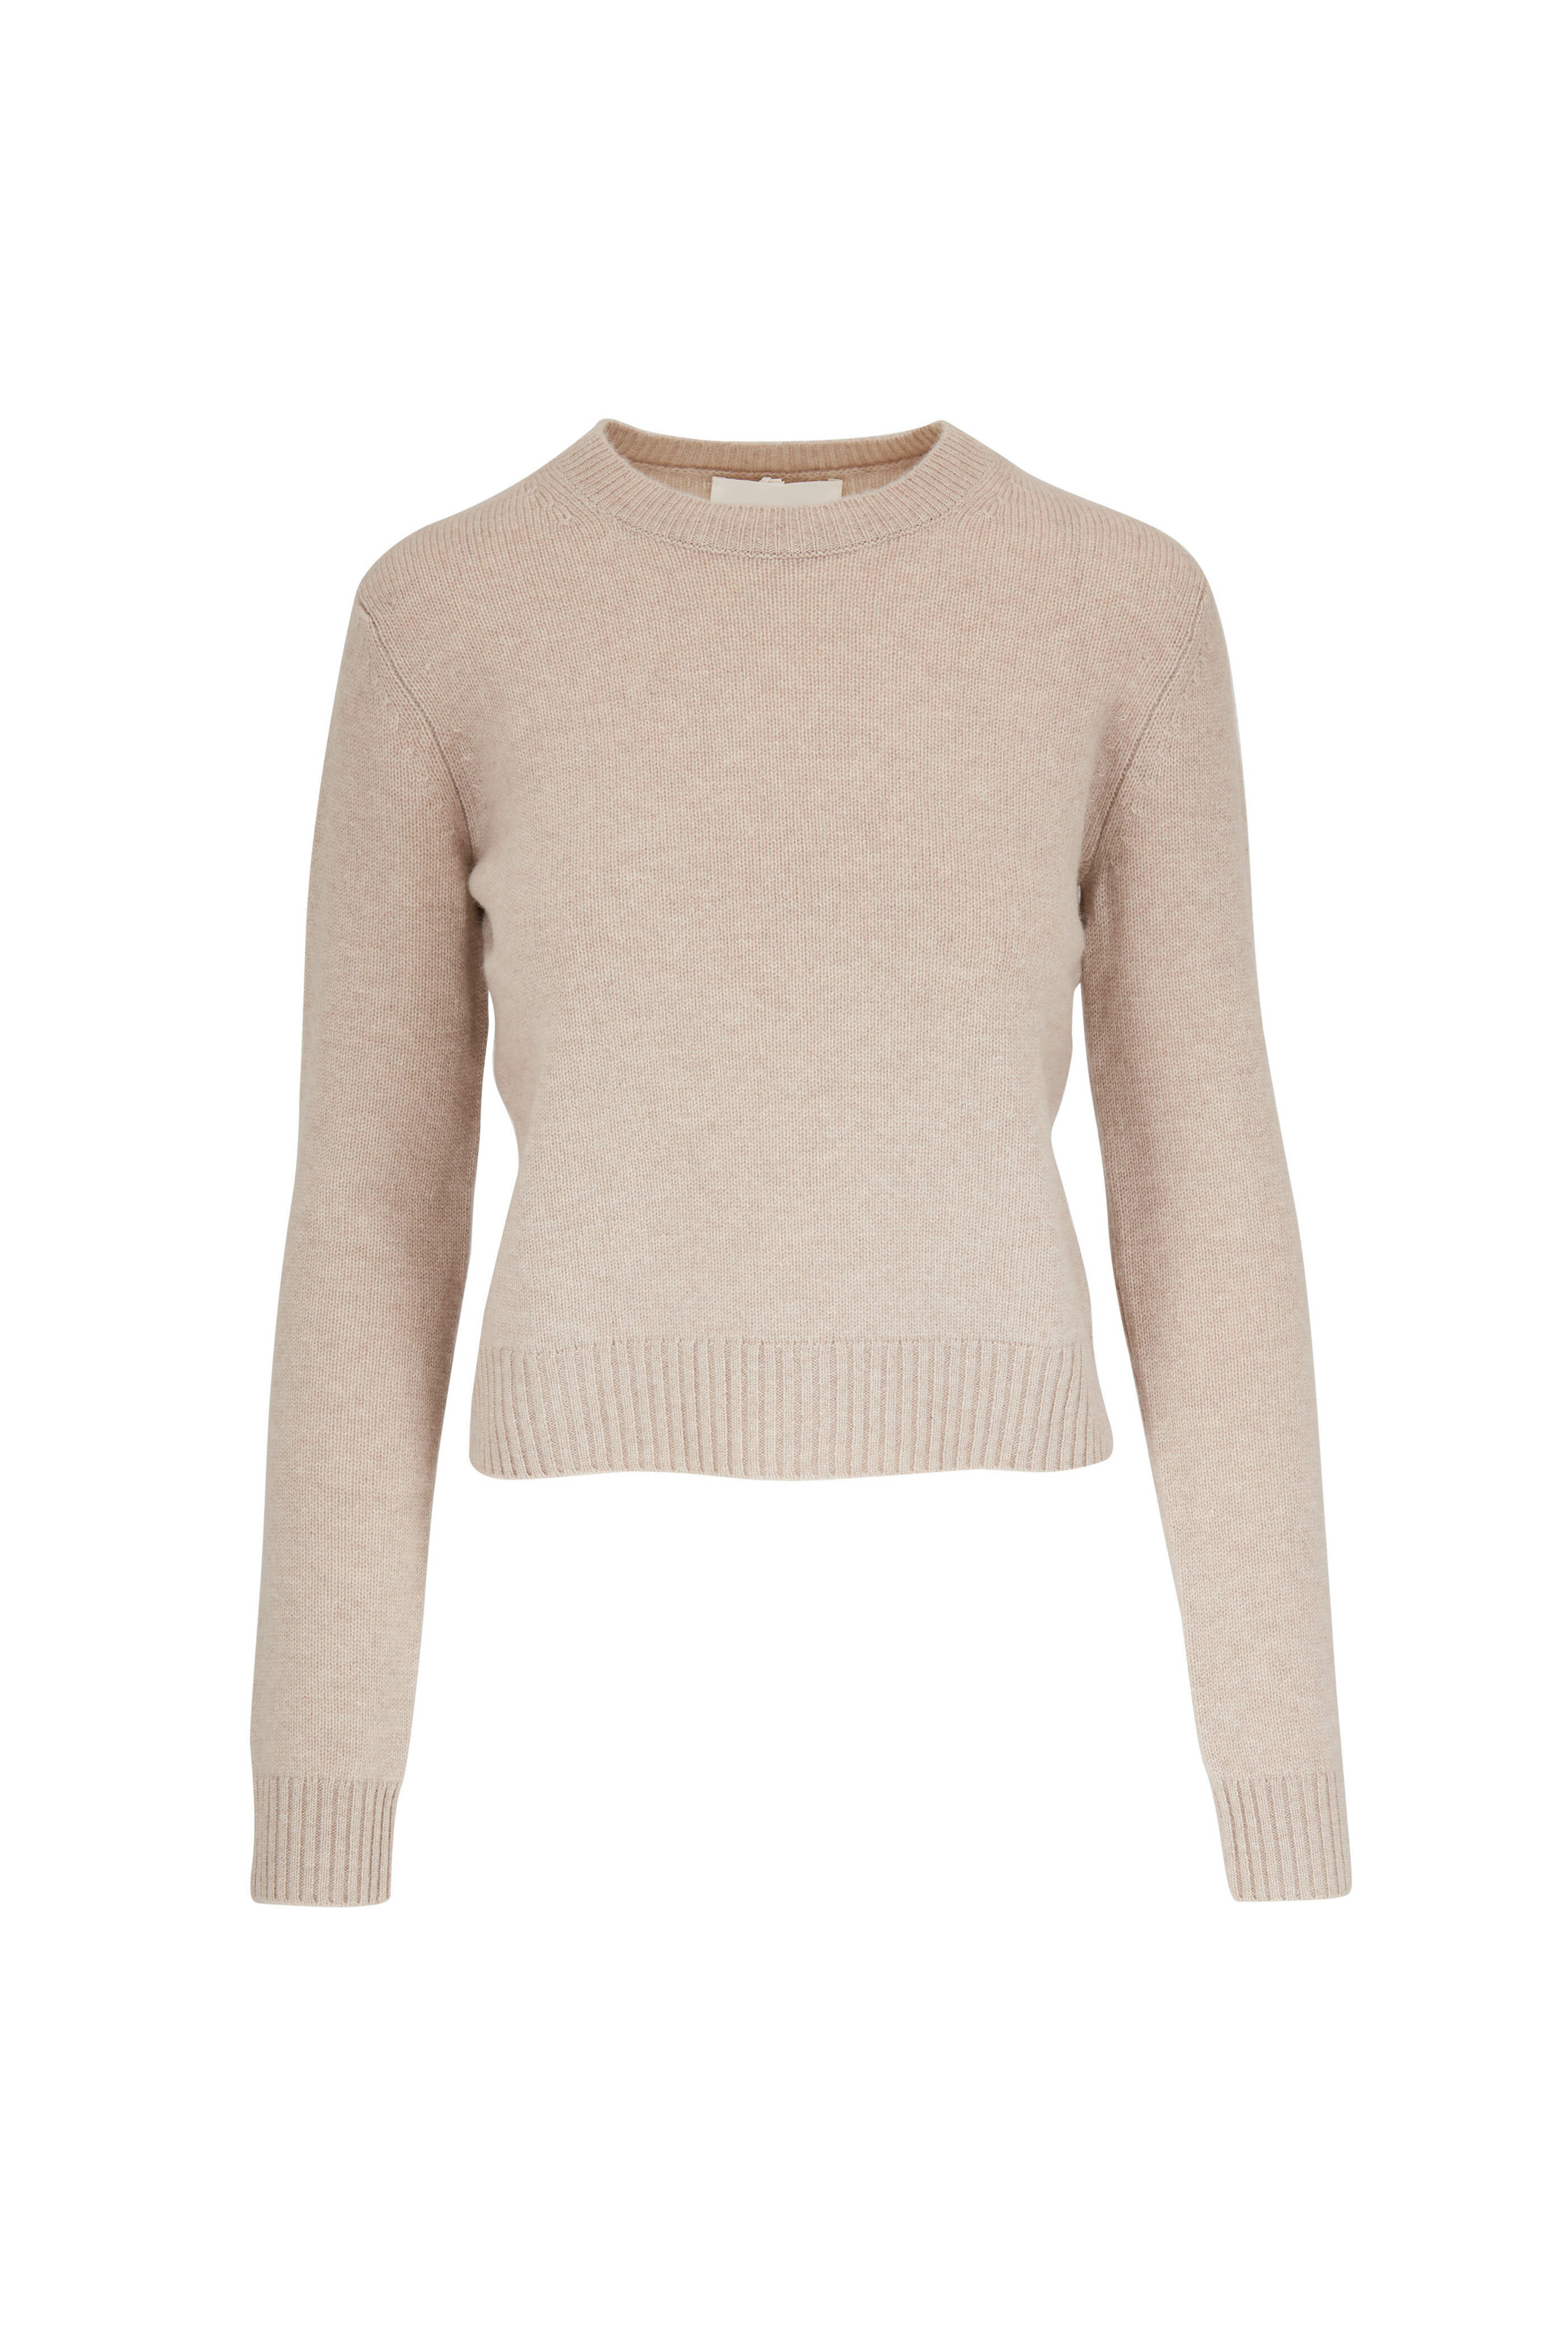 Lisa Yang - Mable Sand Sweater | Mitchell Stores